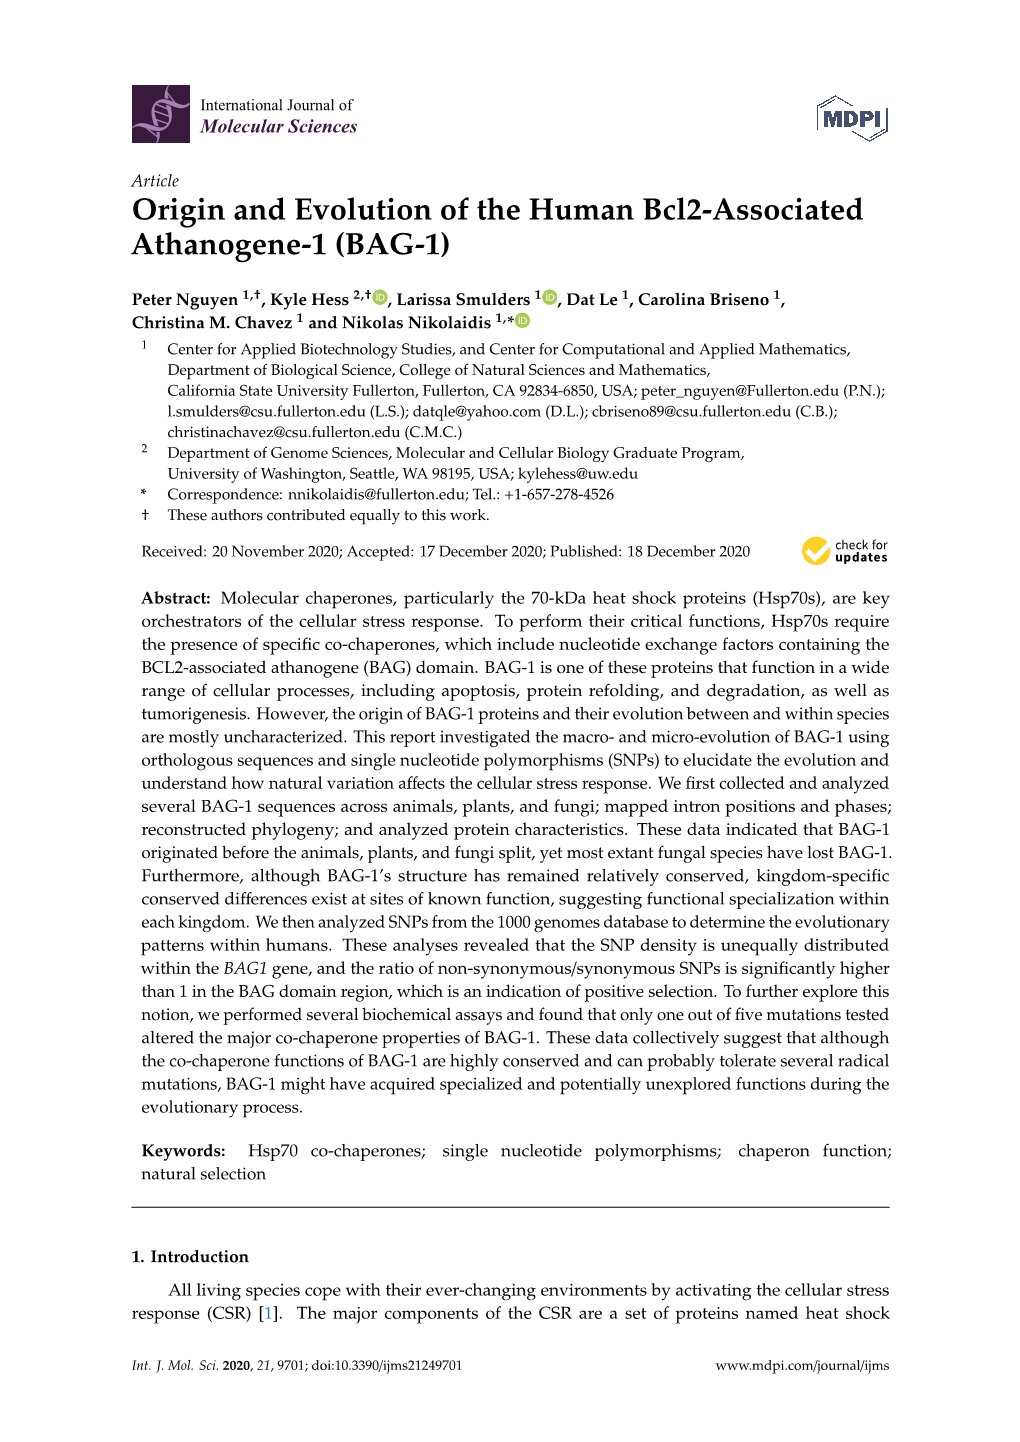 Origin and Evolution of the Human Bcl2-Associated Athanogene-1 (BAG-1)